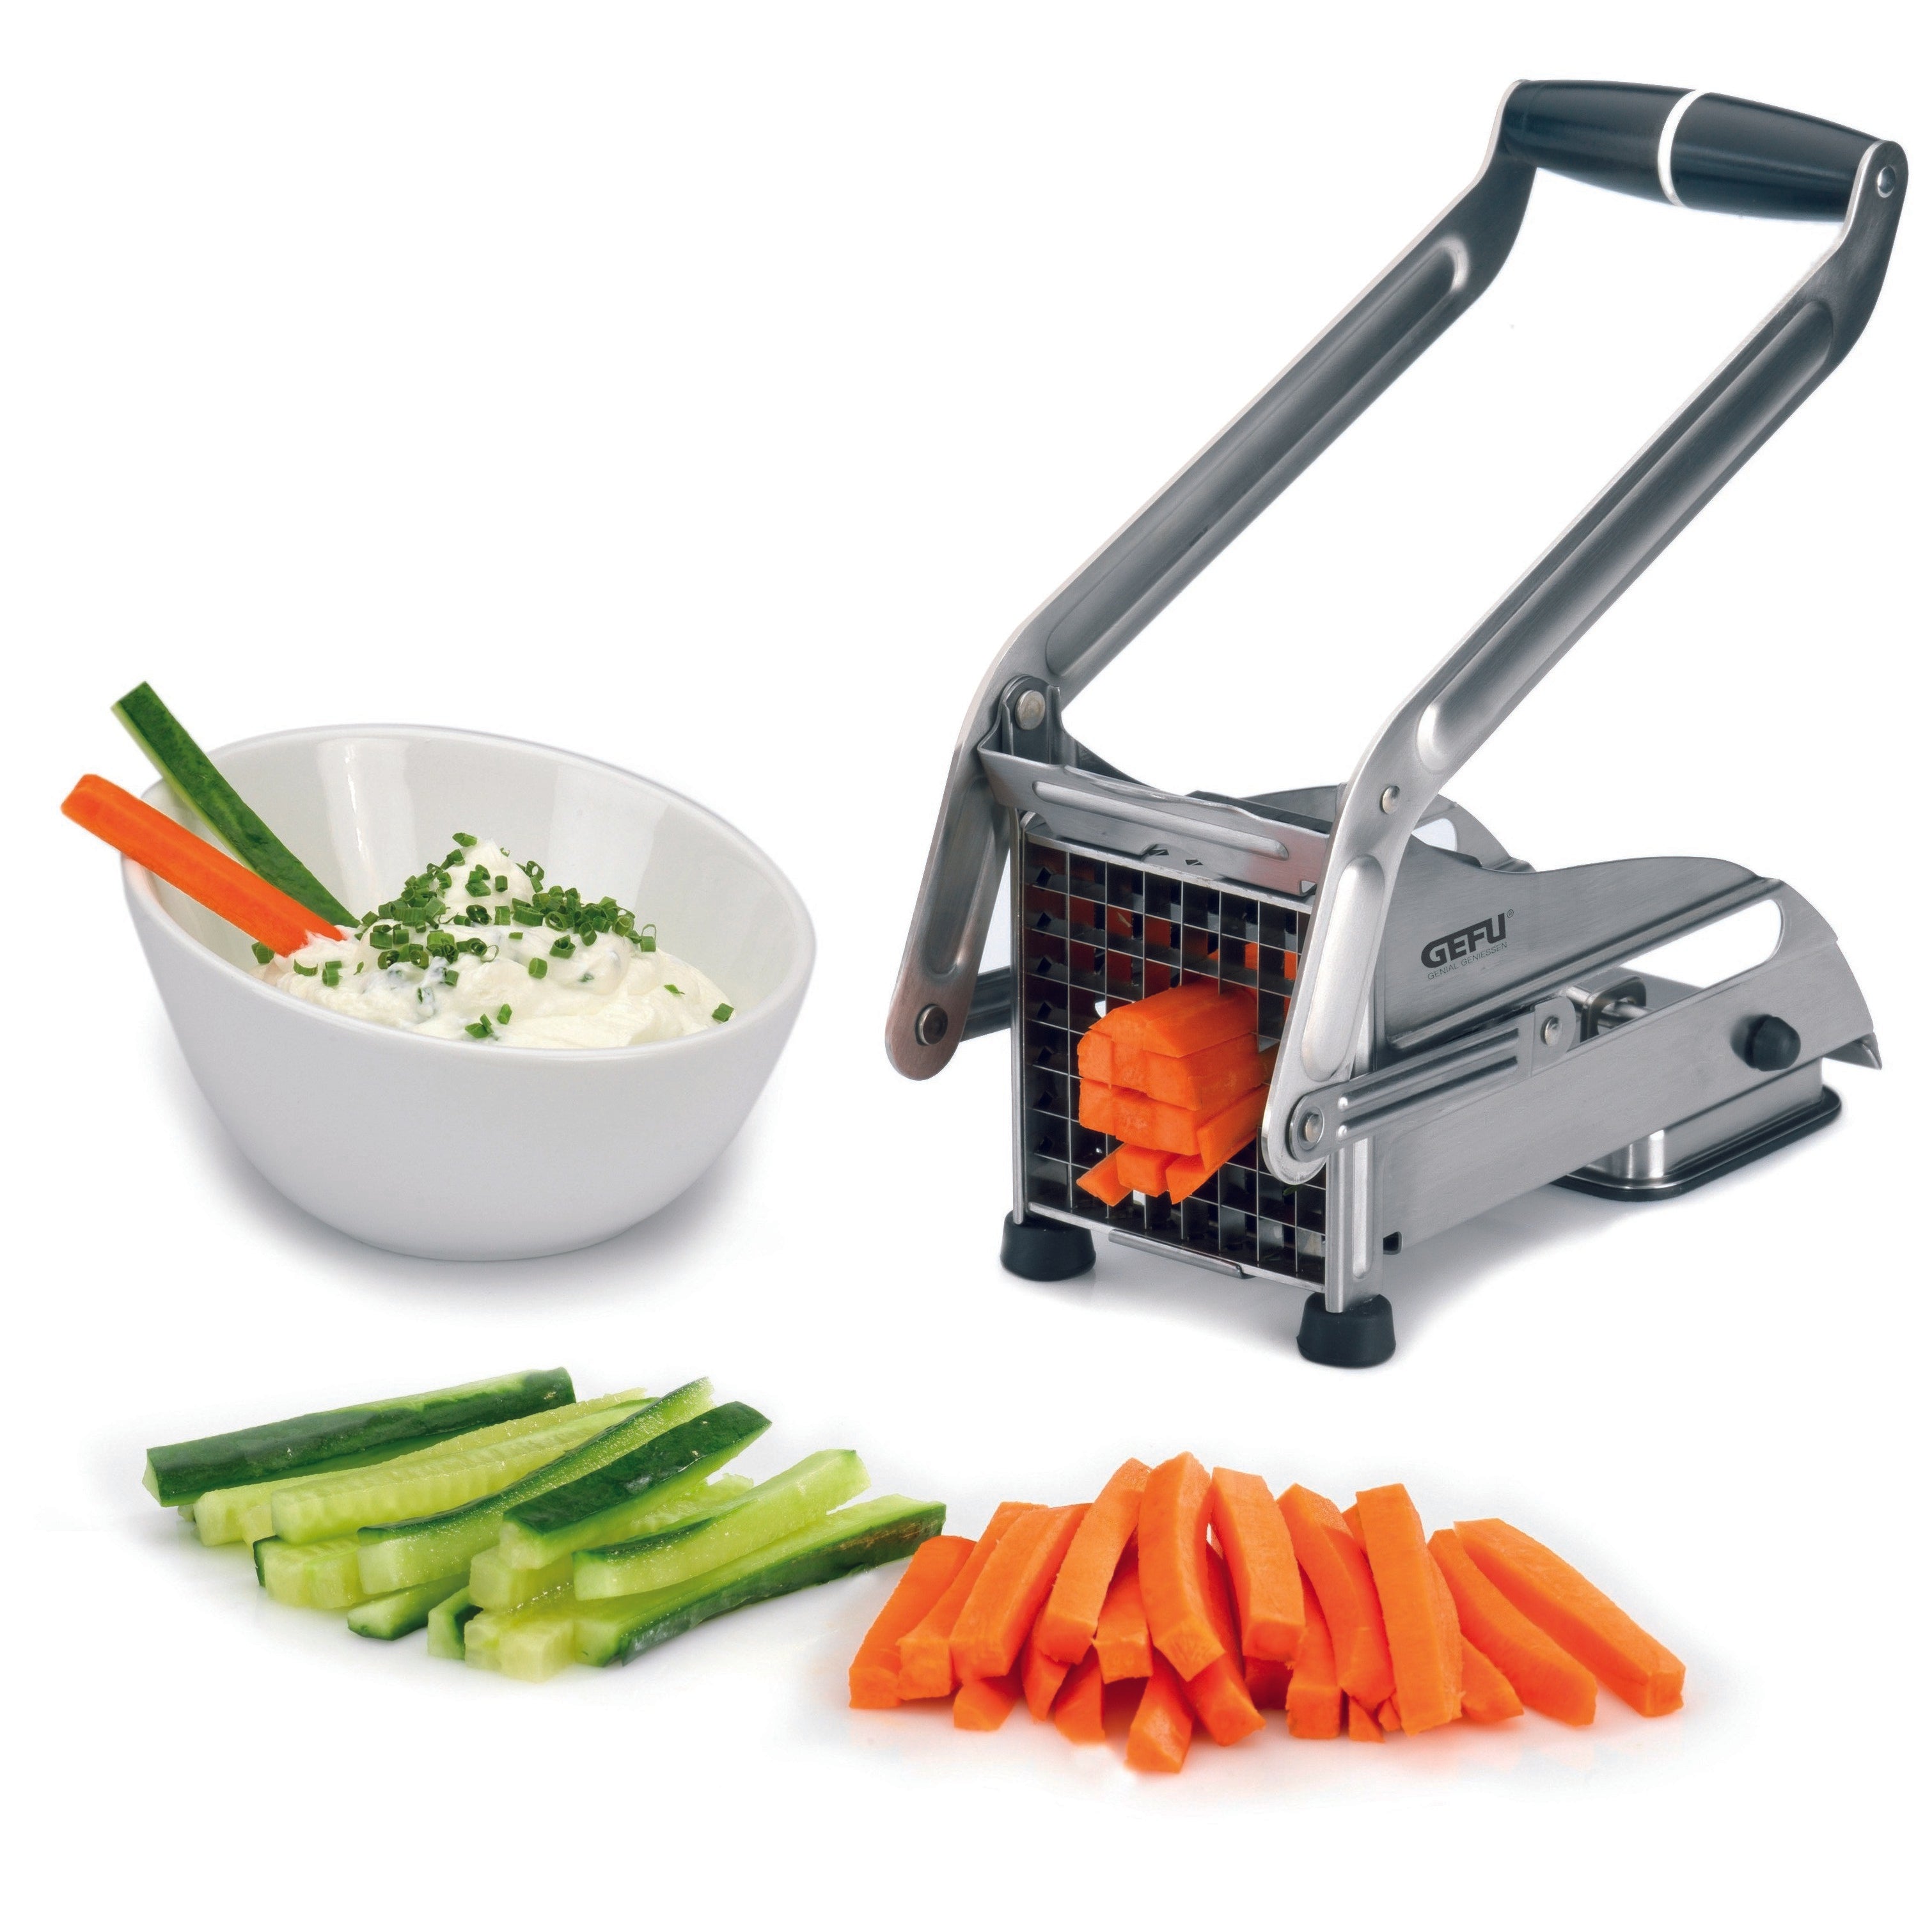 Slicing Grid for Vegetables - CUTTO 13760